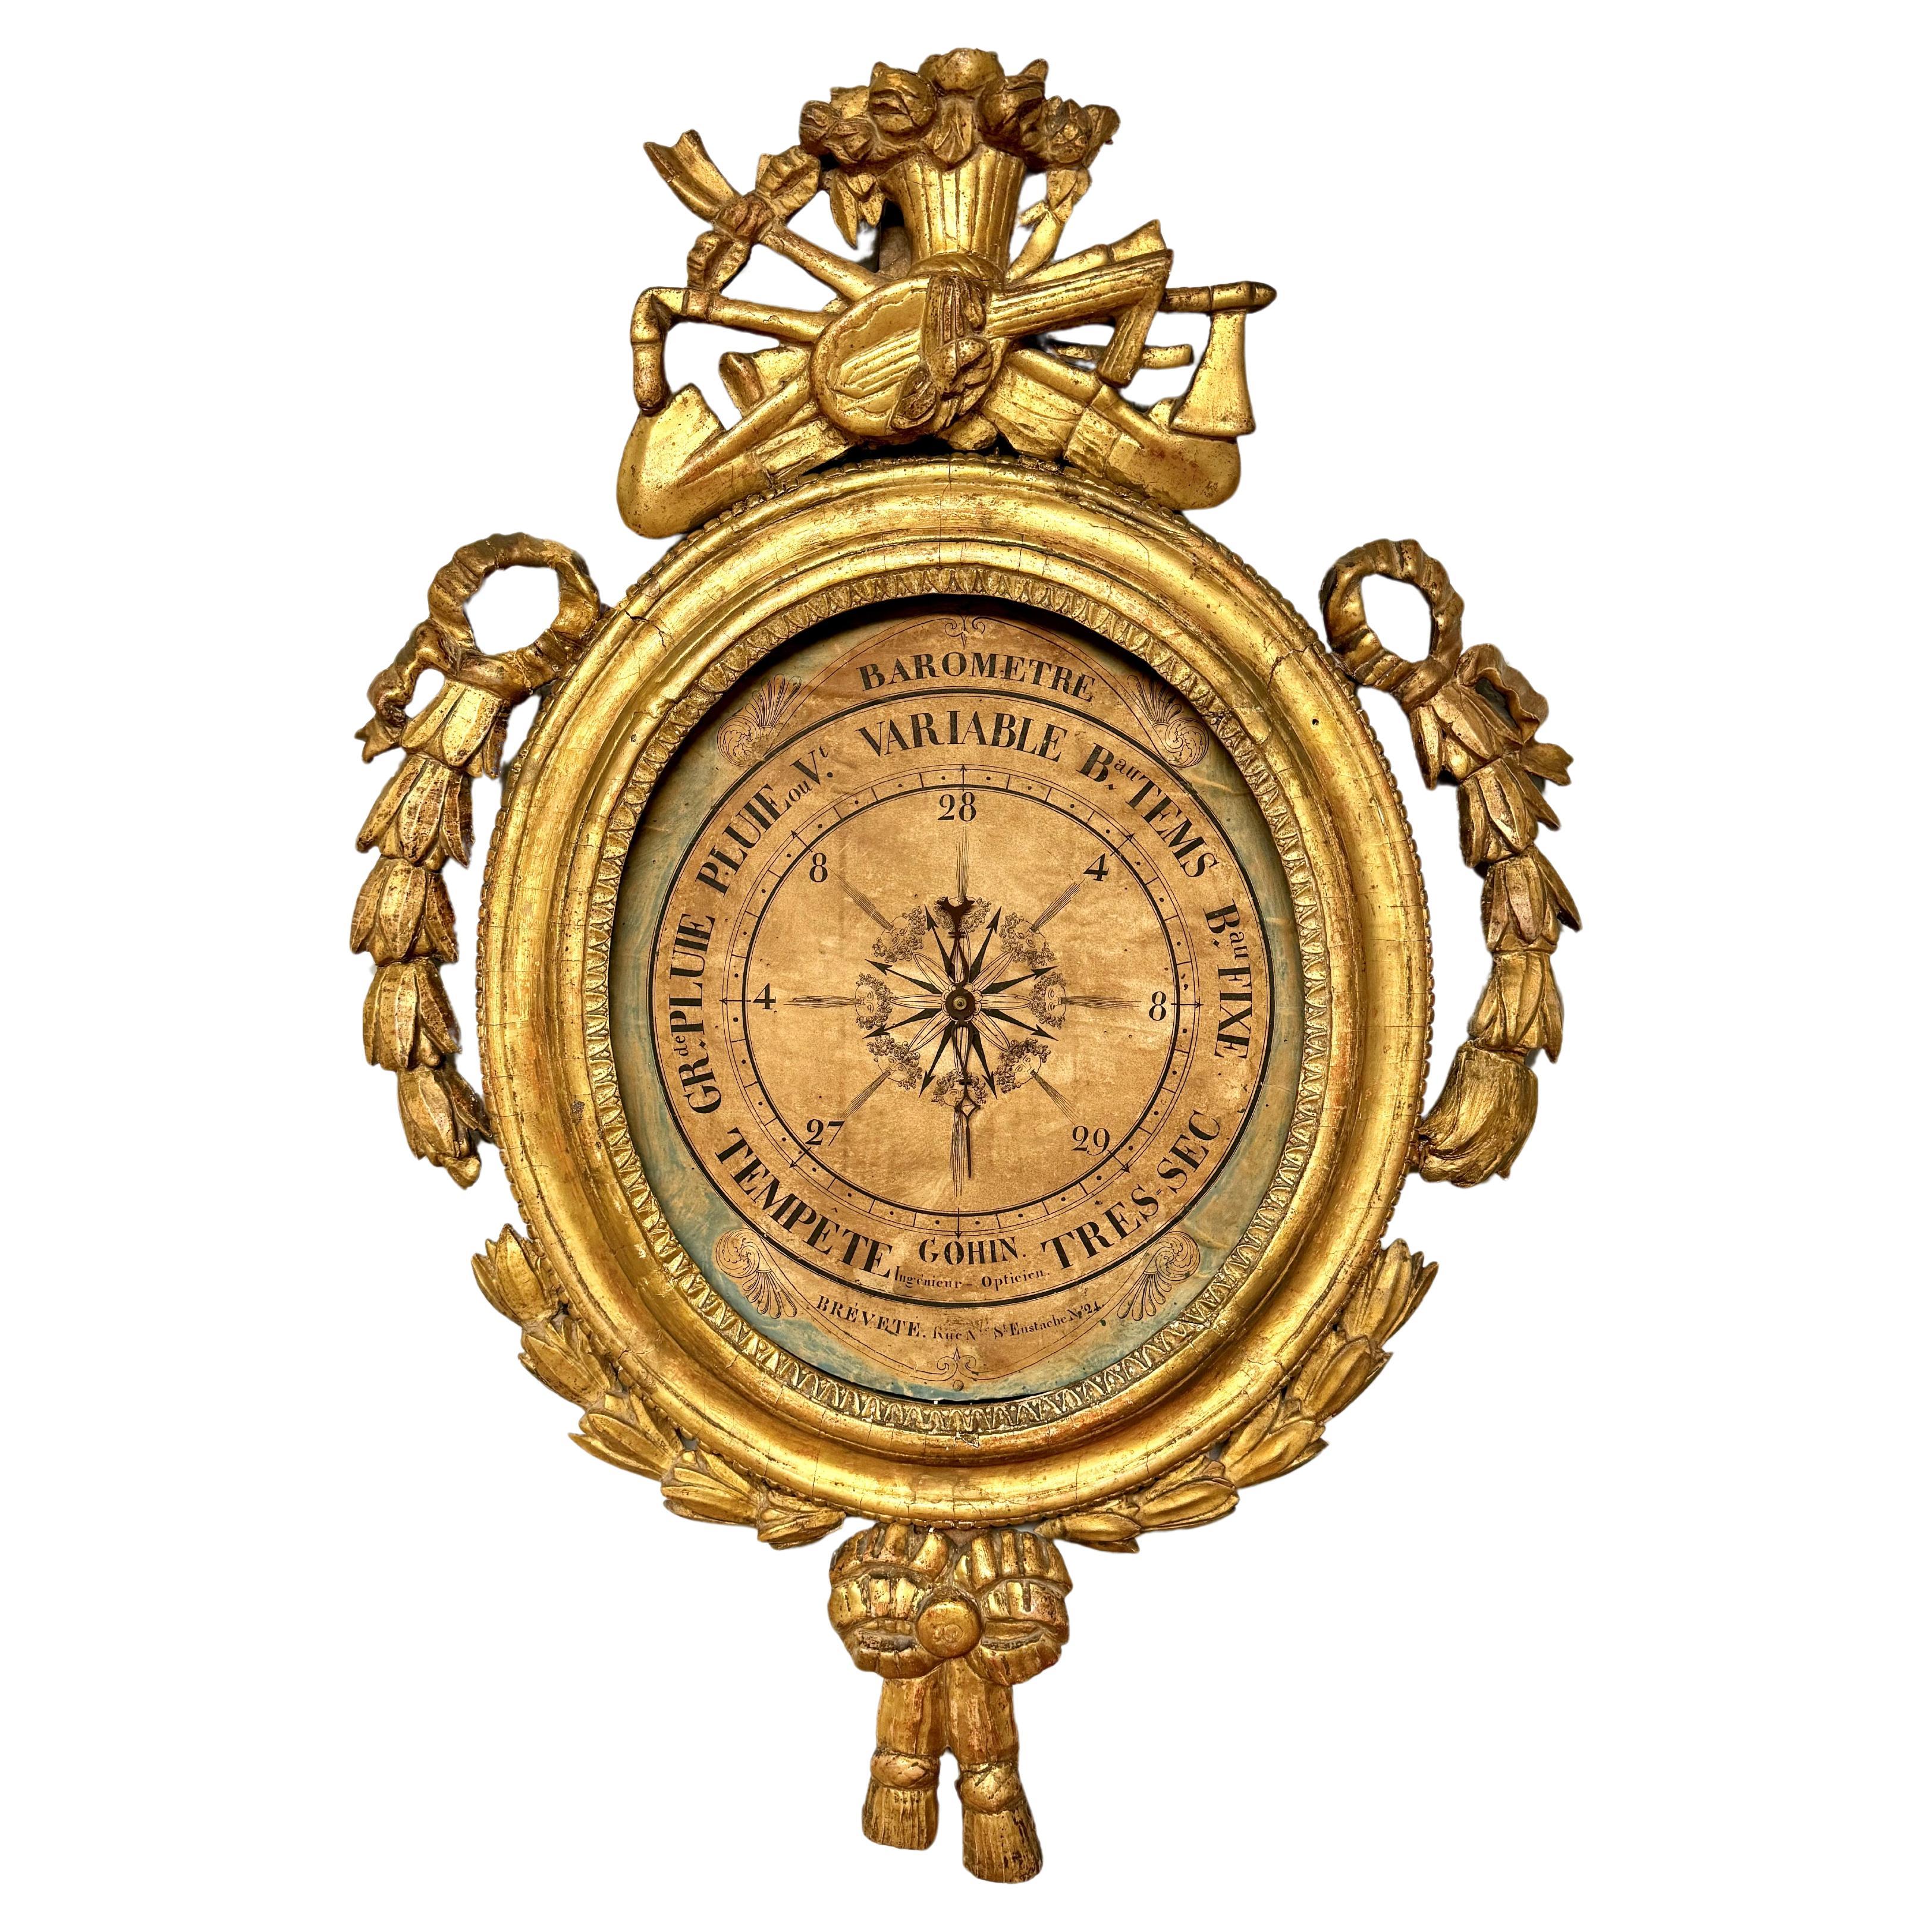 Louis XV French Barometer by GOHIN in giltwood in an oval shape. Features carved and gilded wood with ornamentation of tools, cascading foliage and bows. Original background displays French writing describing weather conditions. A lovely piece for